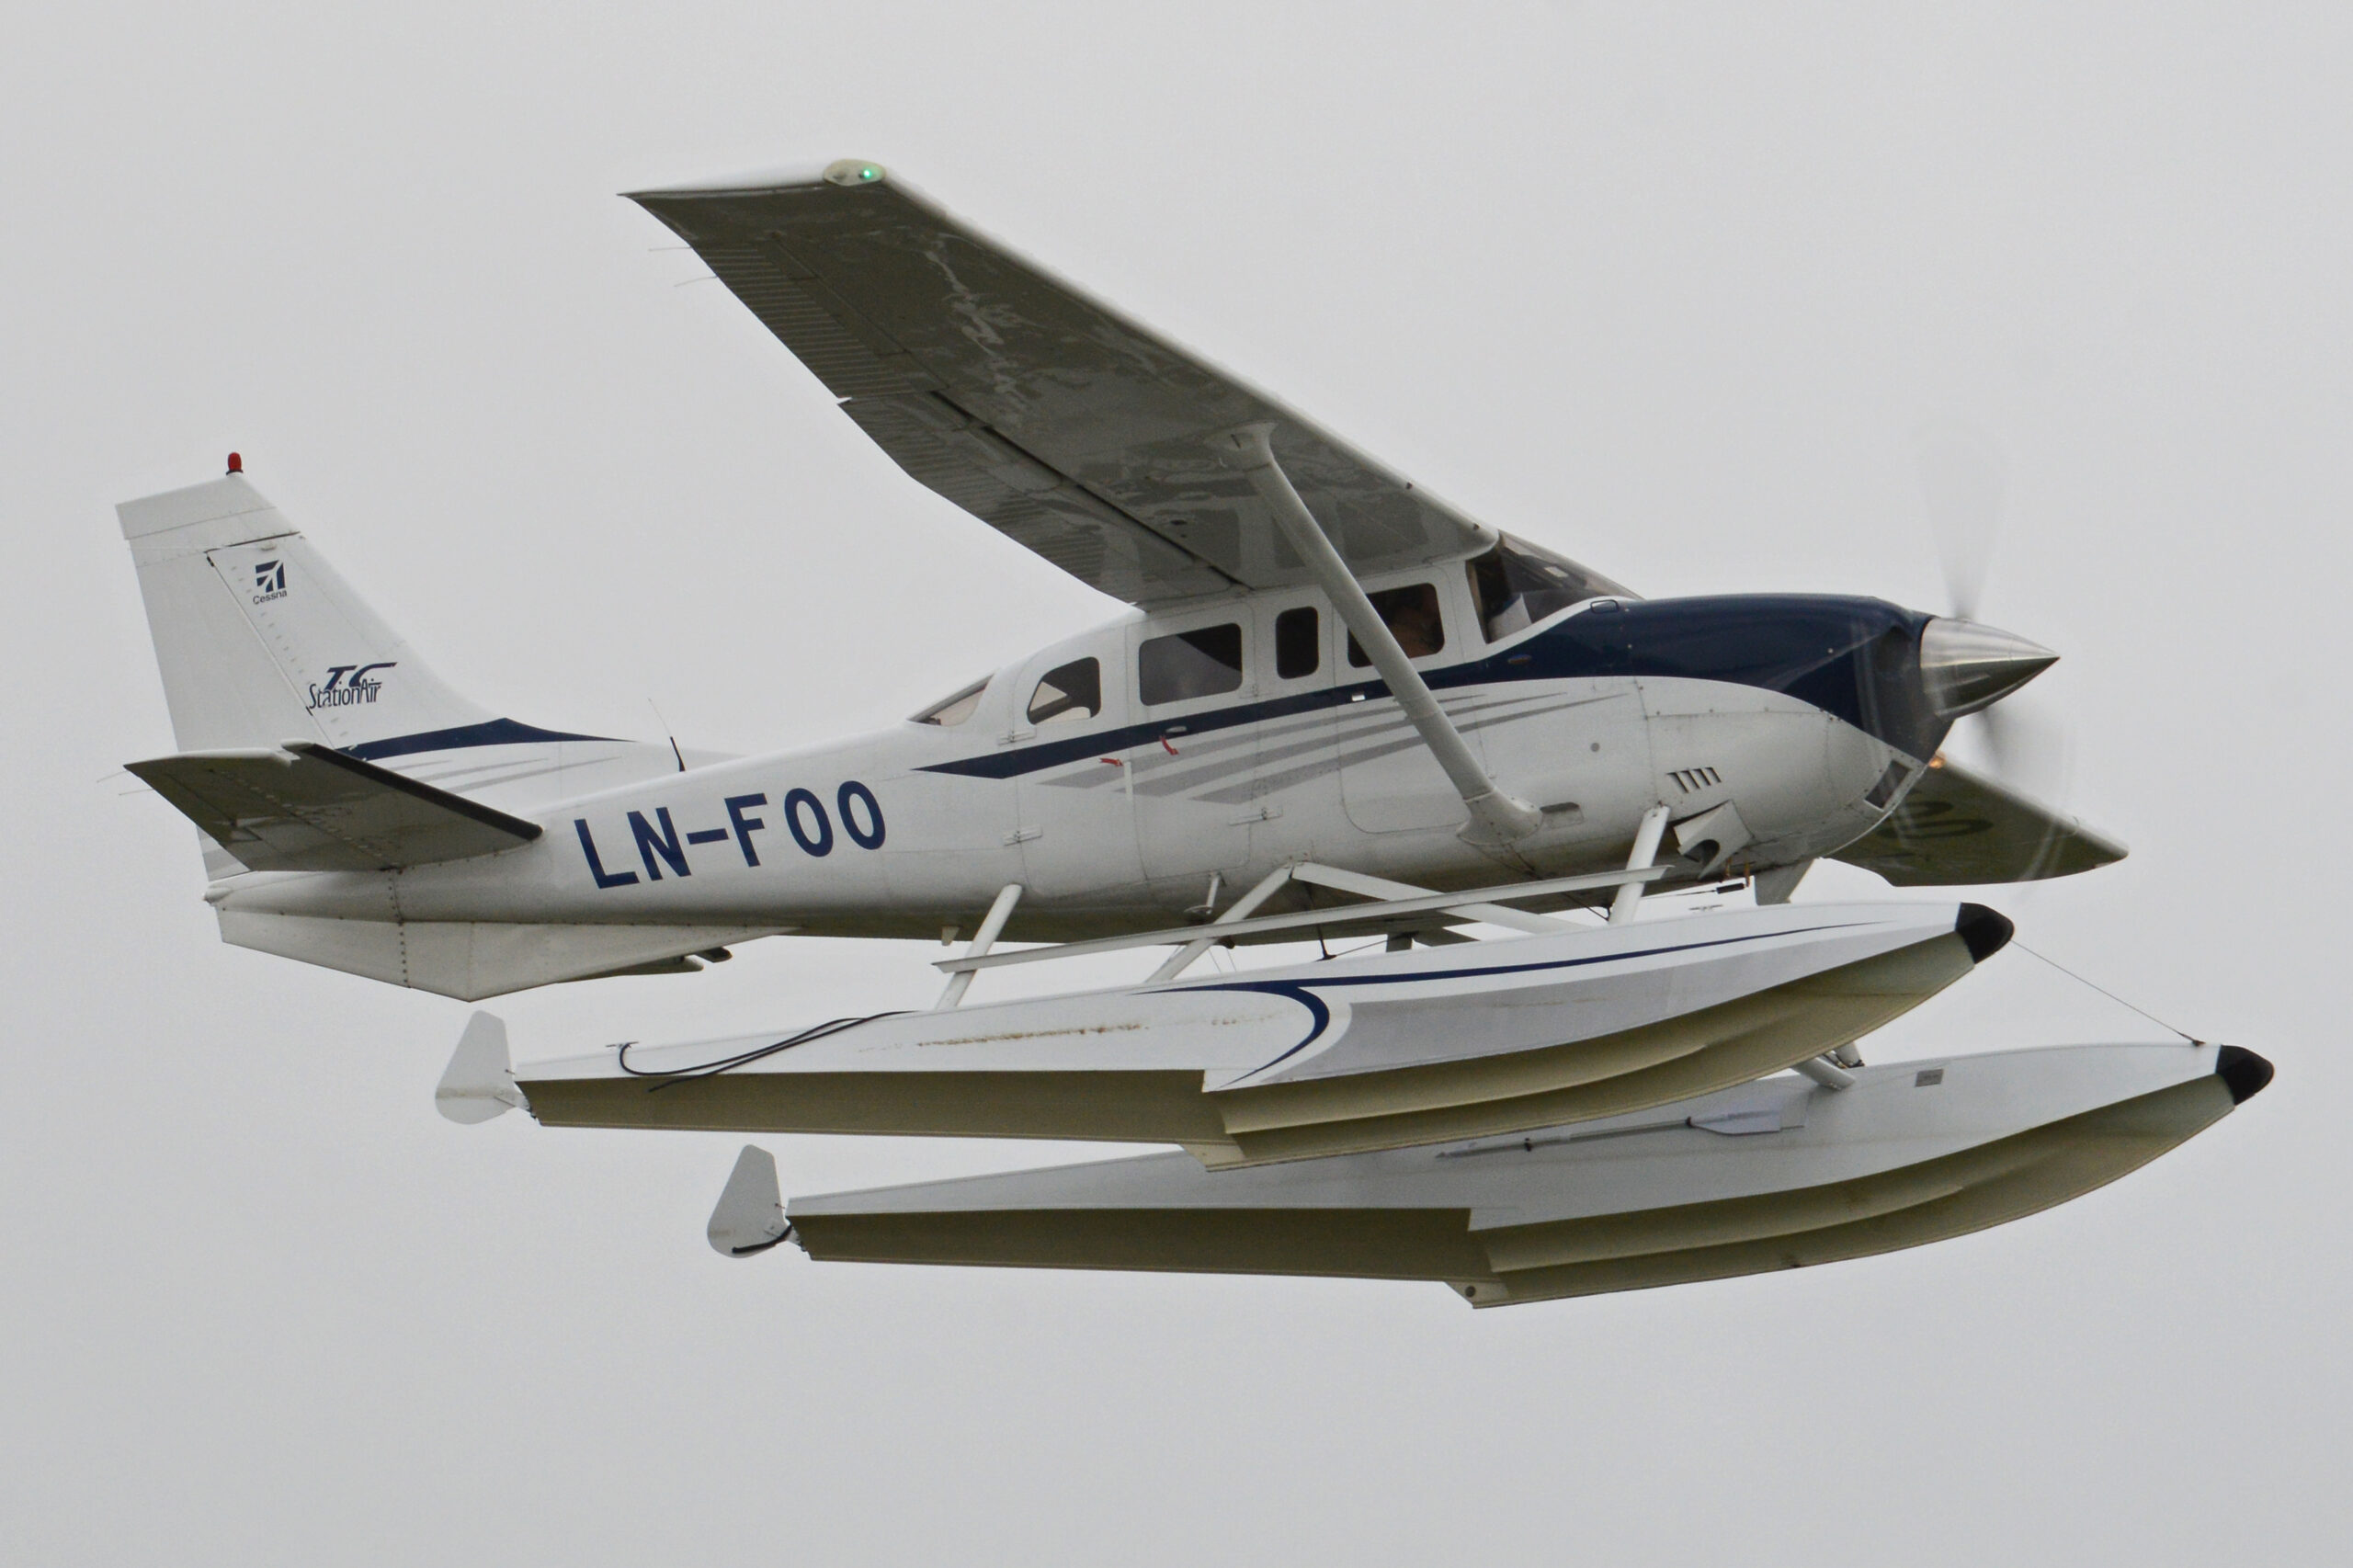 By Alan Wilson from Stilton, Peterborough, Cambs, UK - Cessna T.206H Turbo Stationair ‘LN-FOO’, CC BY-SA 2.0, https://commons.wikimedia.org/w/index.php?curid=72745593